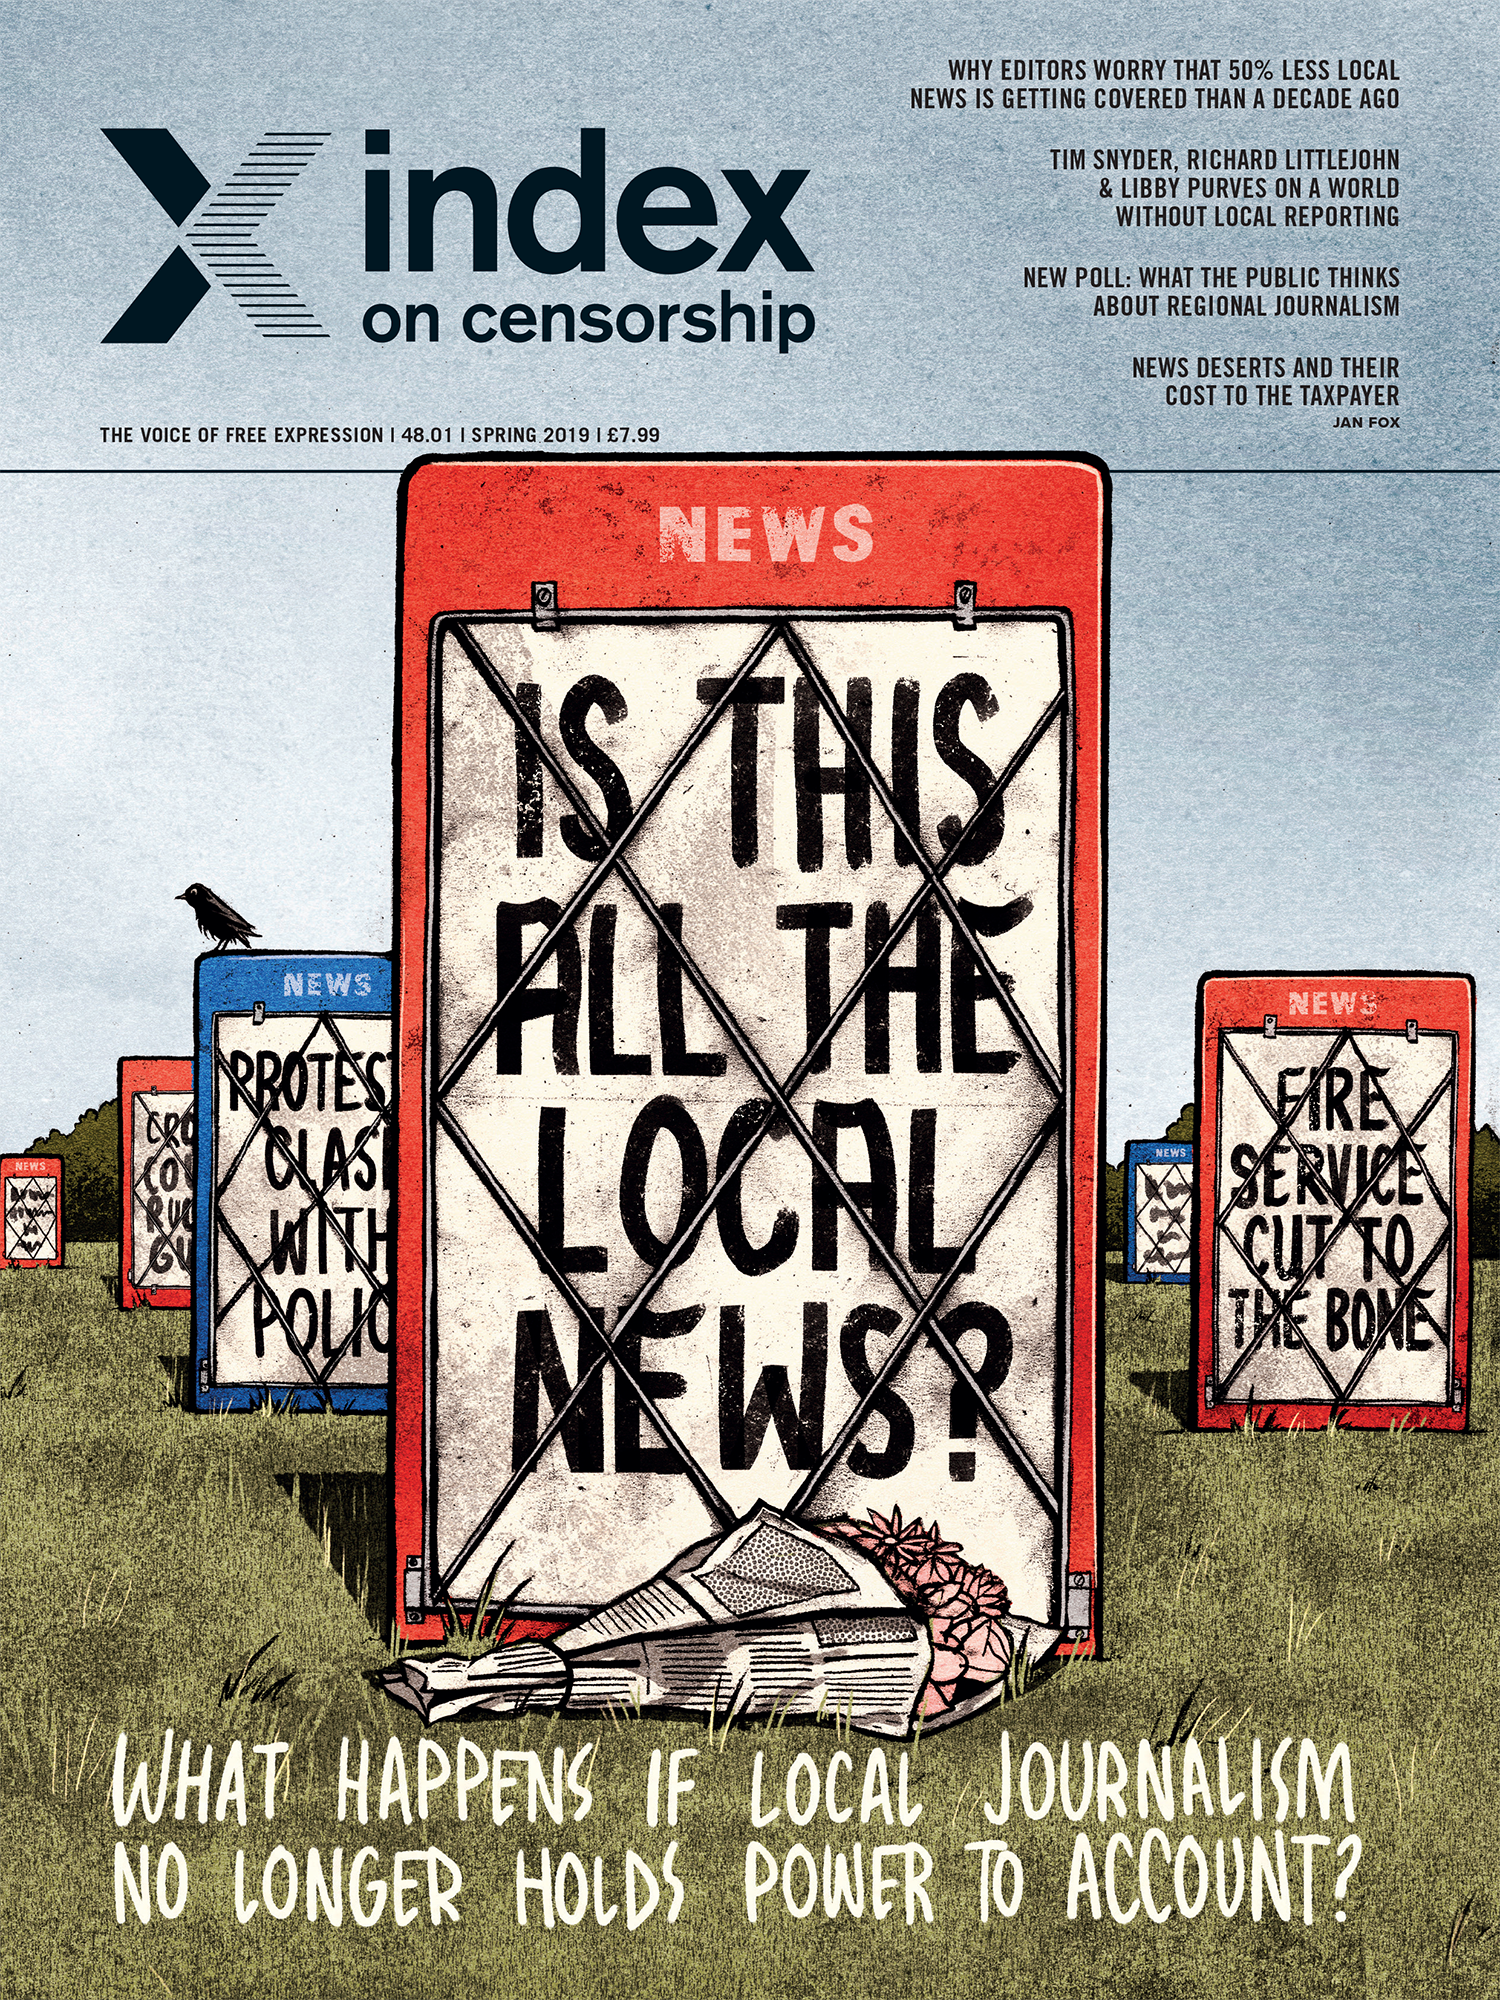 Contents: Is this all the local news?